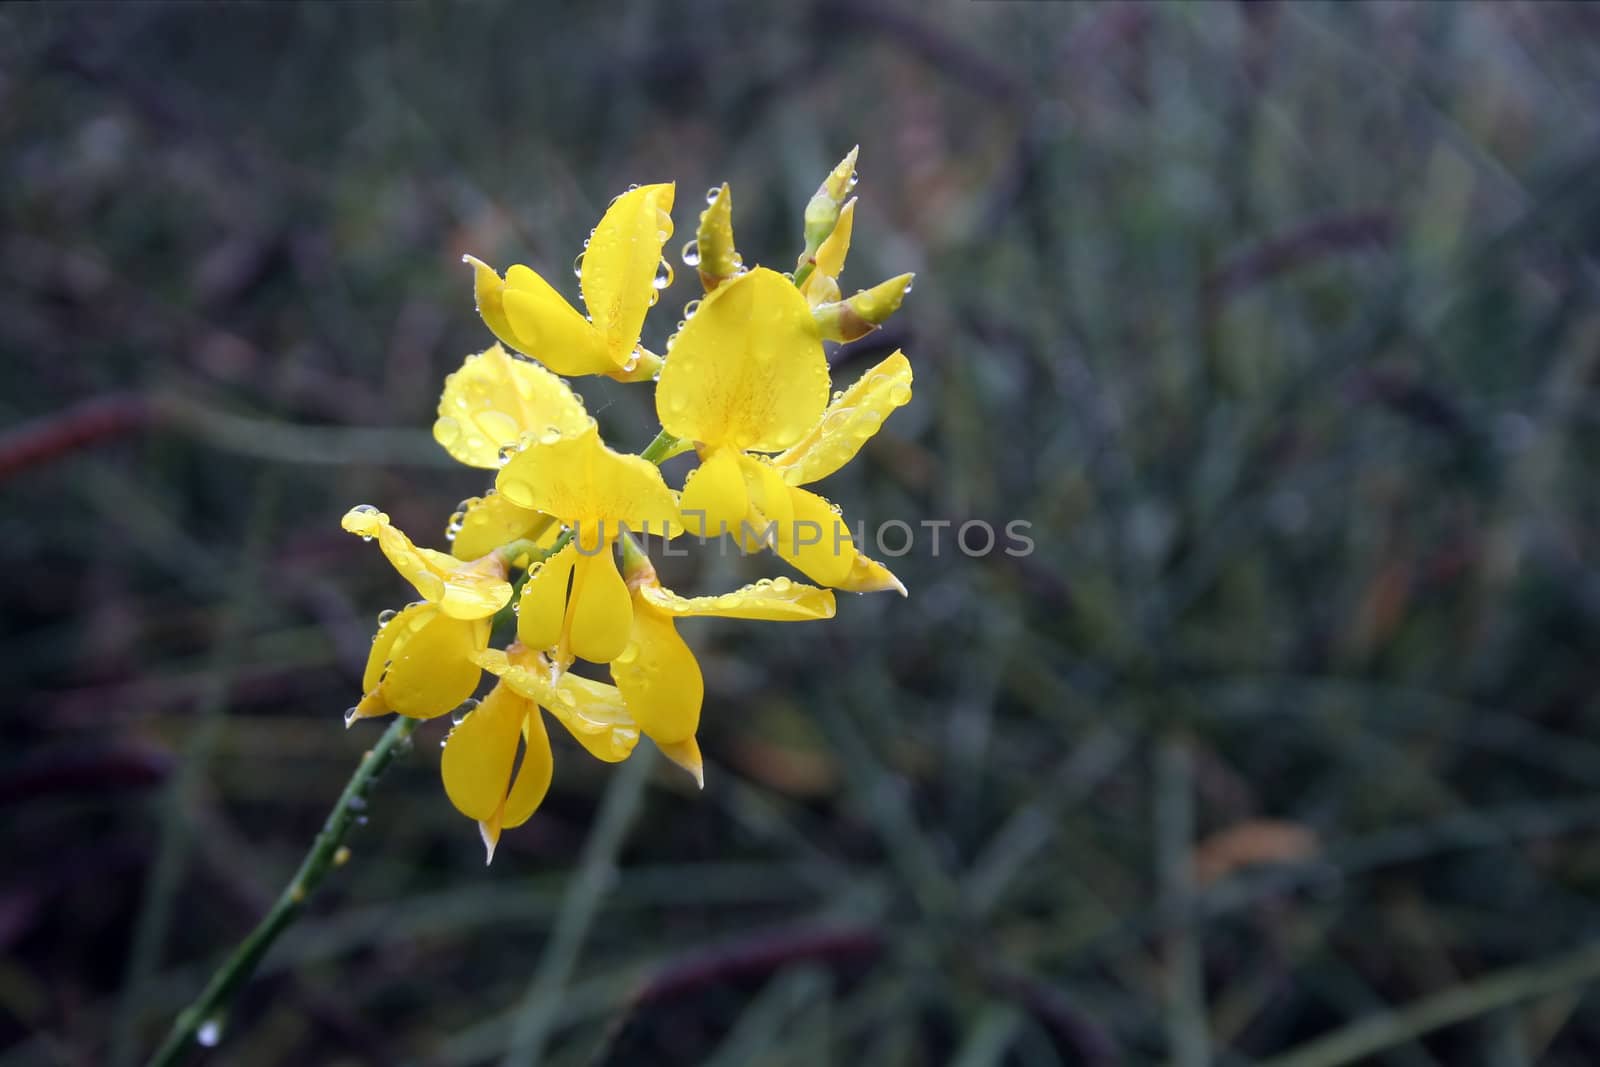 Yellow flowers of a gorse shrub during a september rain. Thick raindrops on the petals.